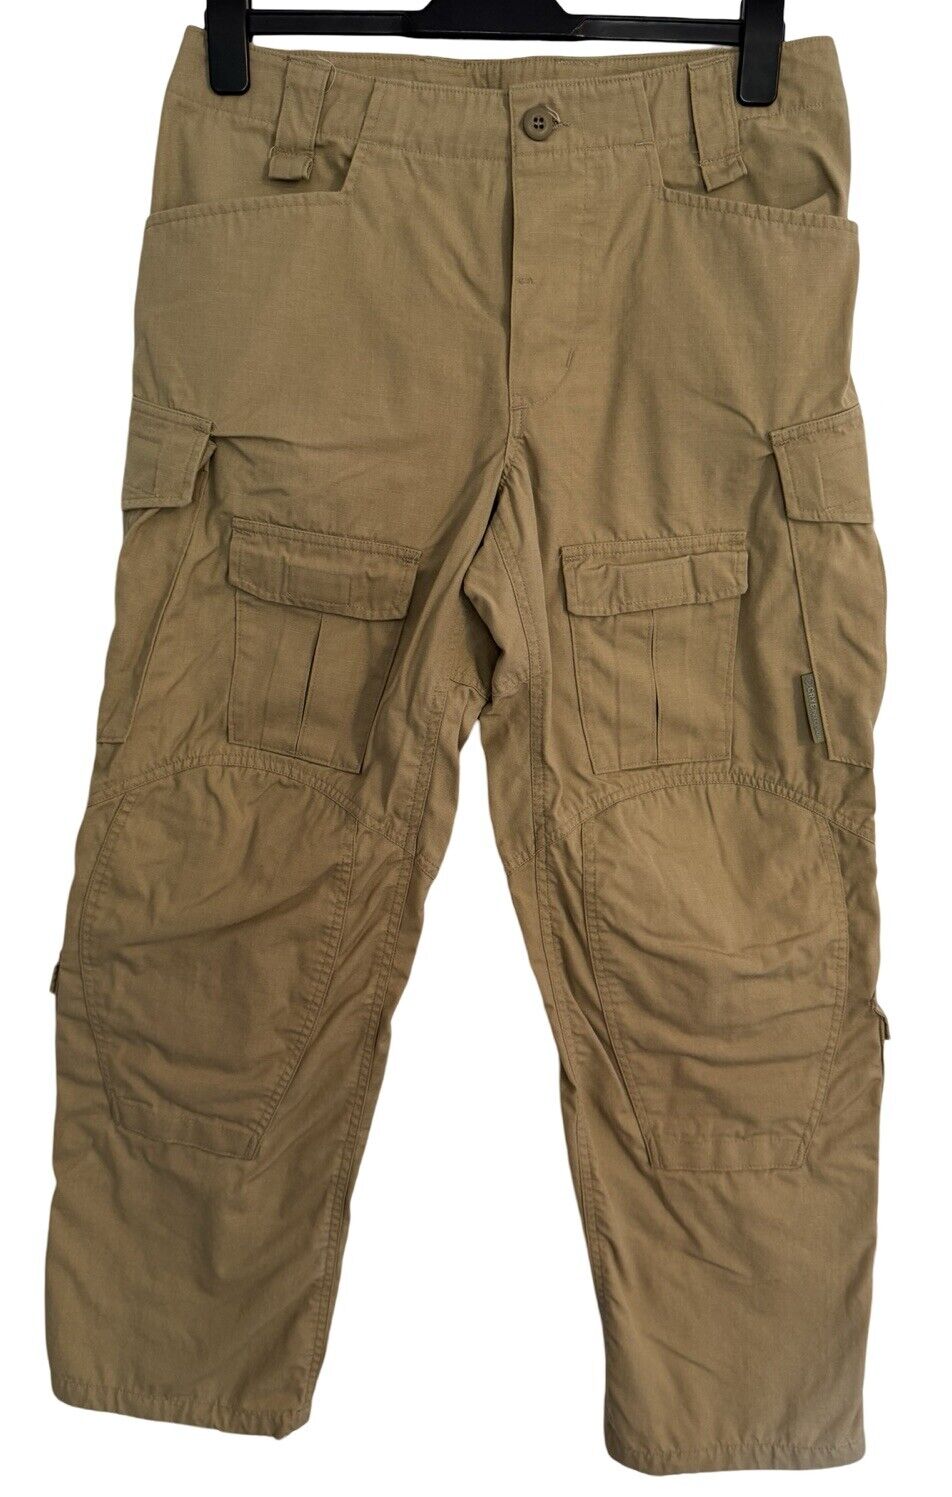 Crye Precision Tactical Field Army Pants Mens 32x31 Double Knee Desert Tan